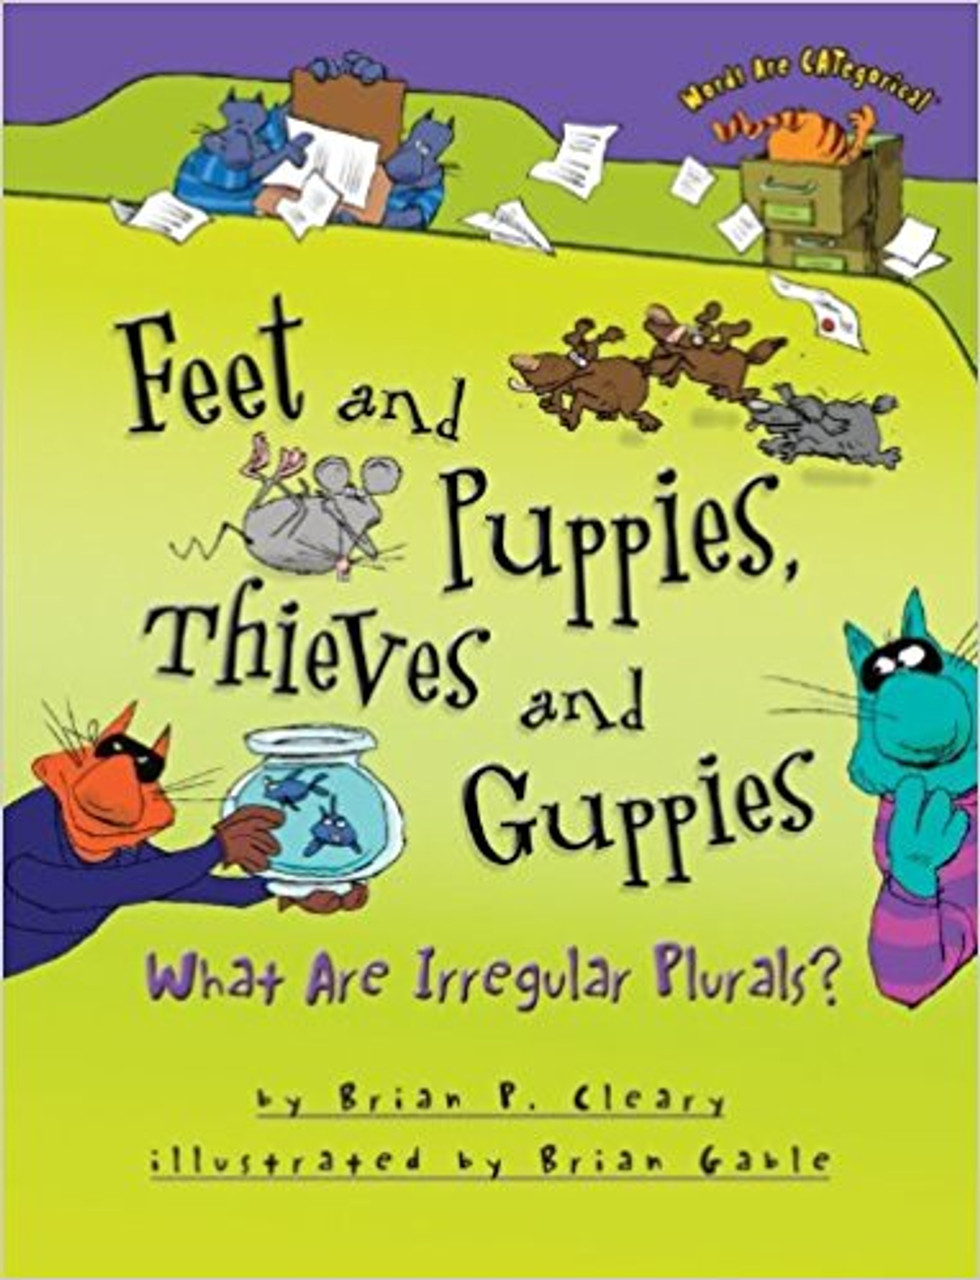 Feet and Puppies, Thieves and Guppies: What Are Irregular Plurals? by Brian P Cleary